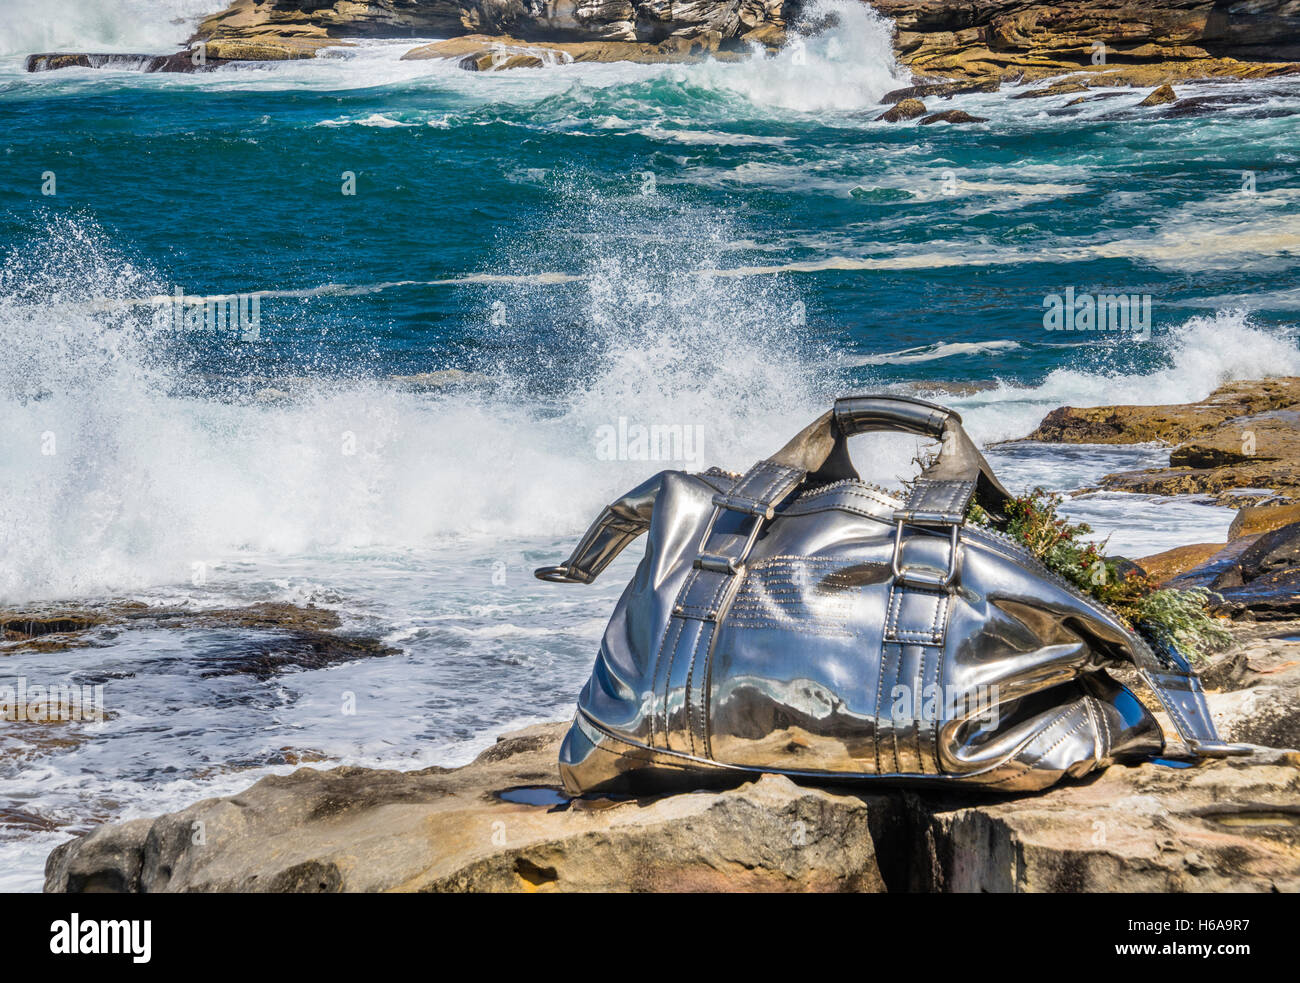 Bondi Beach, Sydney, Australia. 24th Oct, 2016. Sculpture by the Sea, Australia's largest annual outdoor sculpture exhibition along the coastal walk from Bondi Beach to Tamarama Beach. Stainless steel sculpture by chinese sculptor Yumin Jing titled 'Travelling Bag' Credit:  Manfred Gottschalk/Alamy Live News Stock Photo